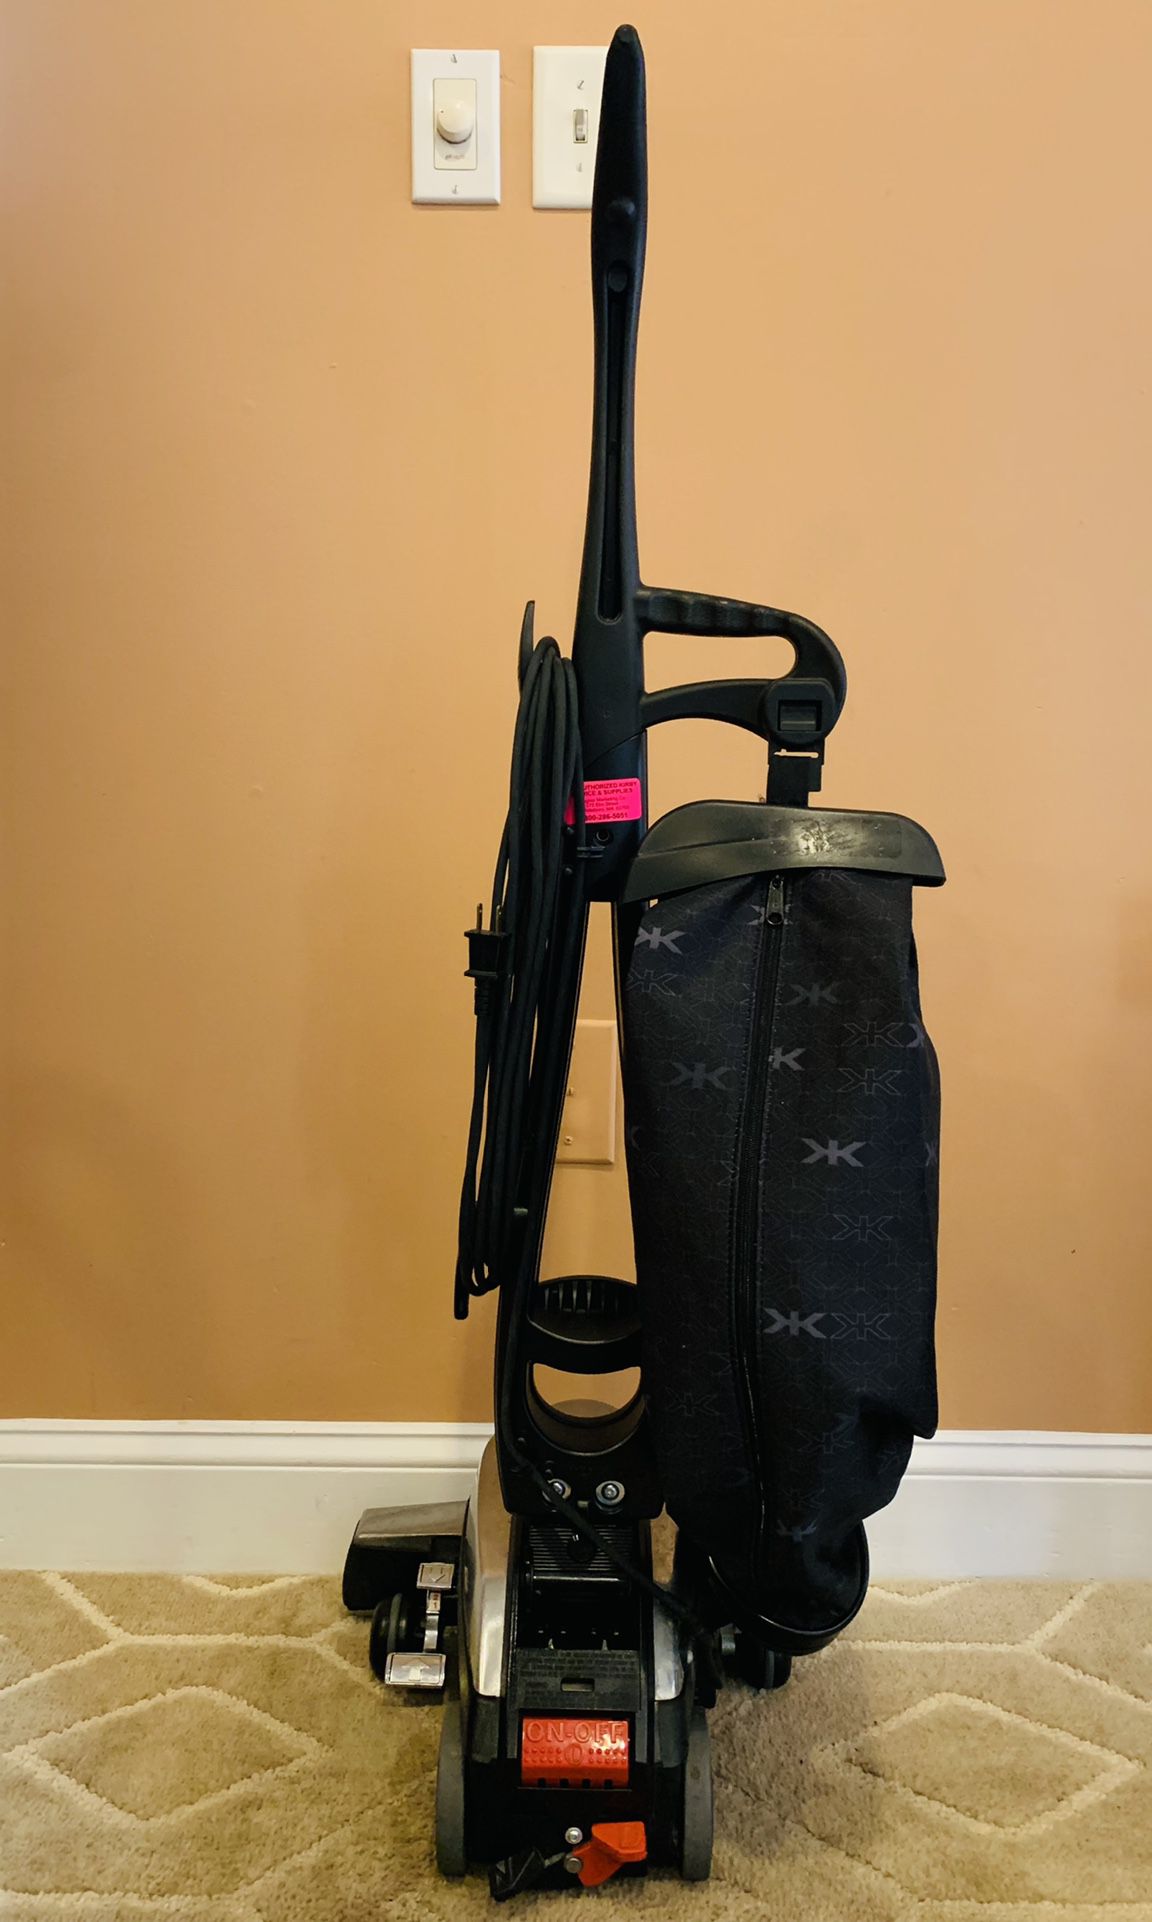 Kirby Avalir vacuum cleaner with attachments